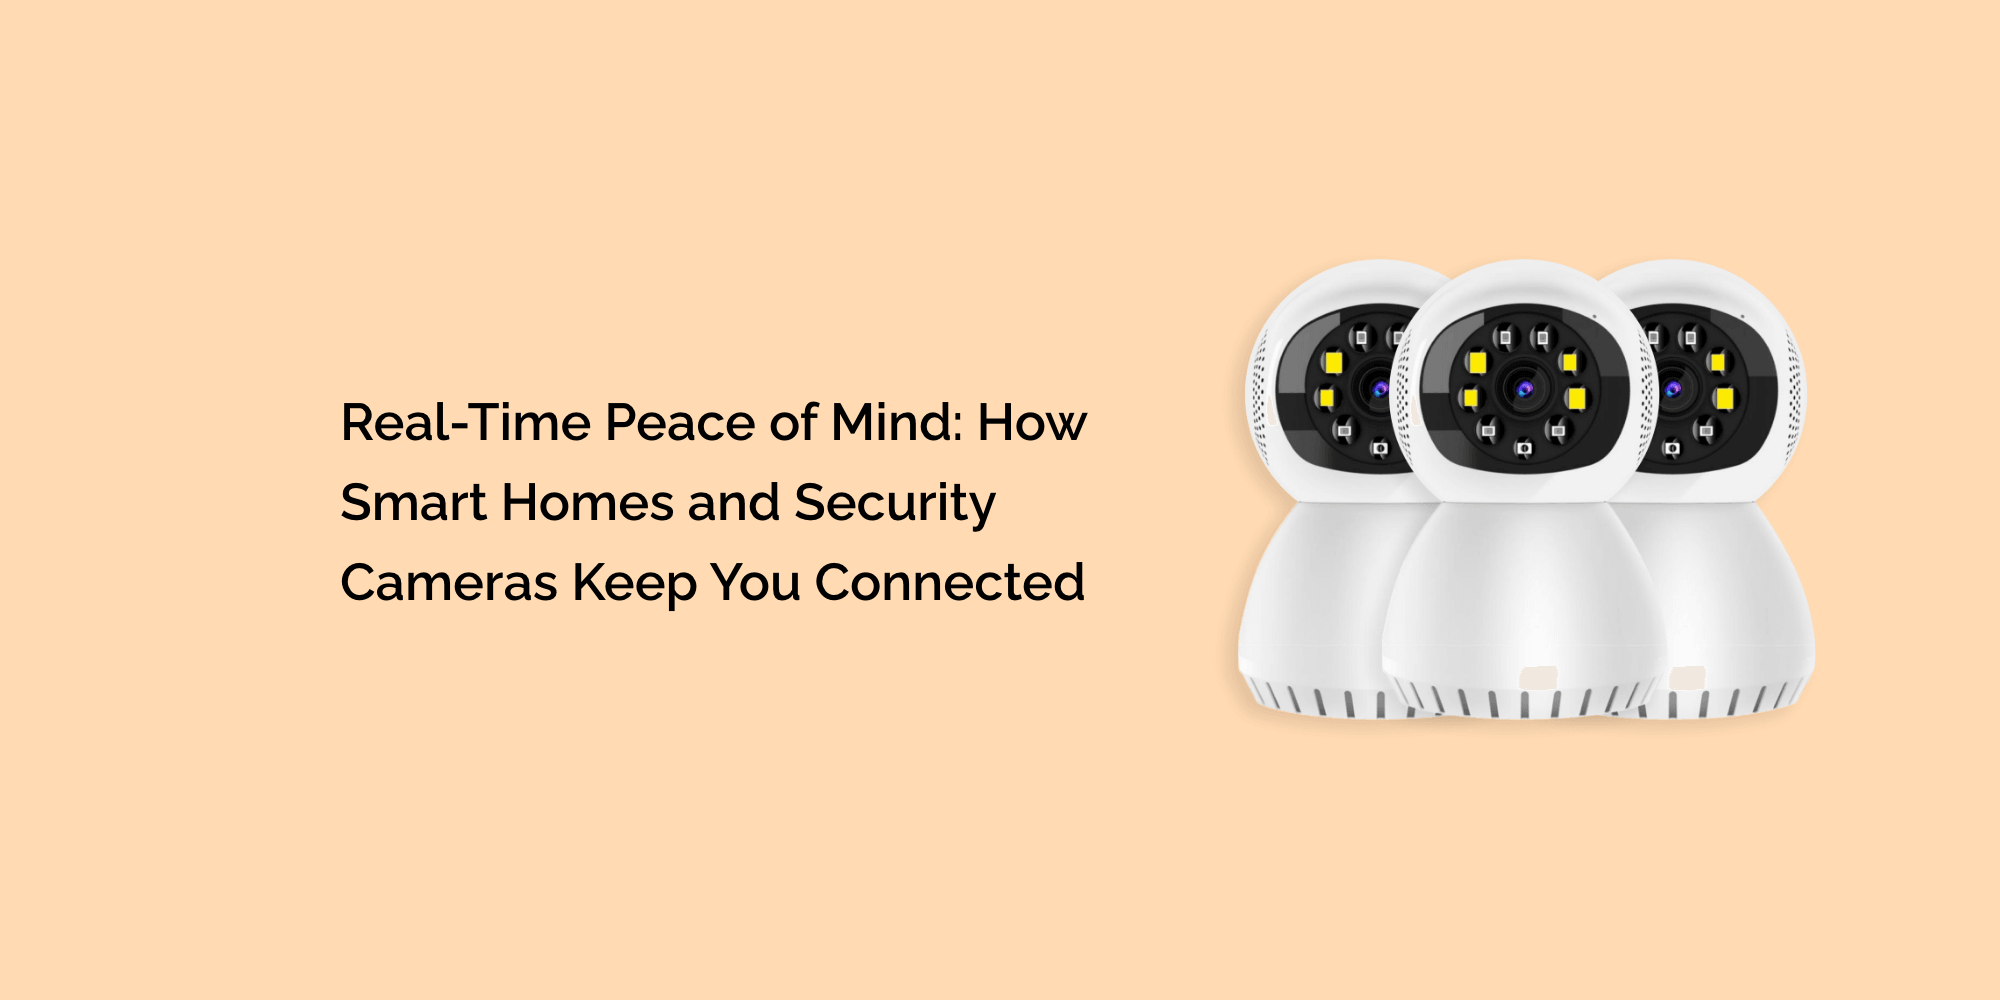 Real-Time Peace of Mind: How Smart Homes and Security Cameras Keep You Connected